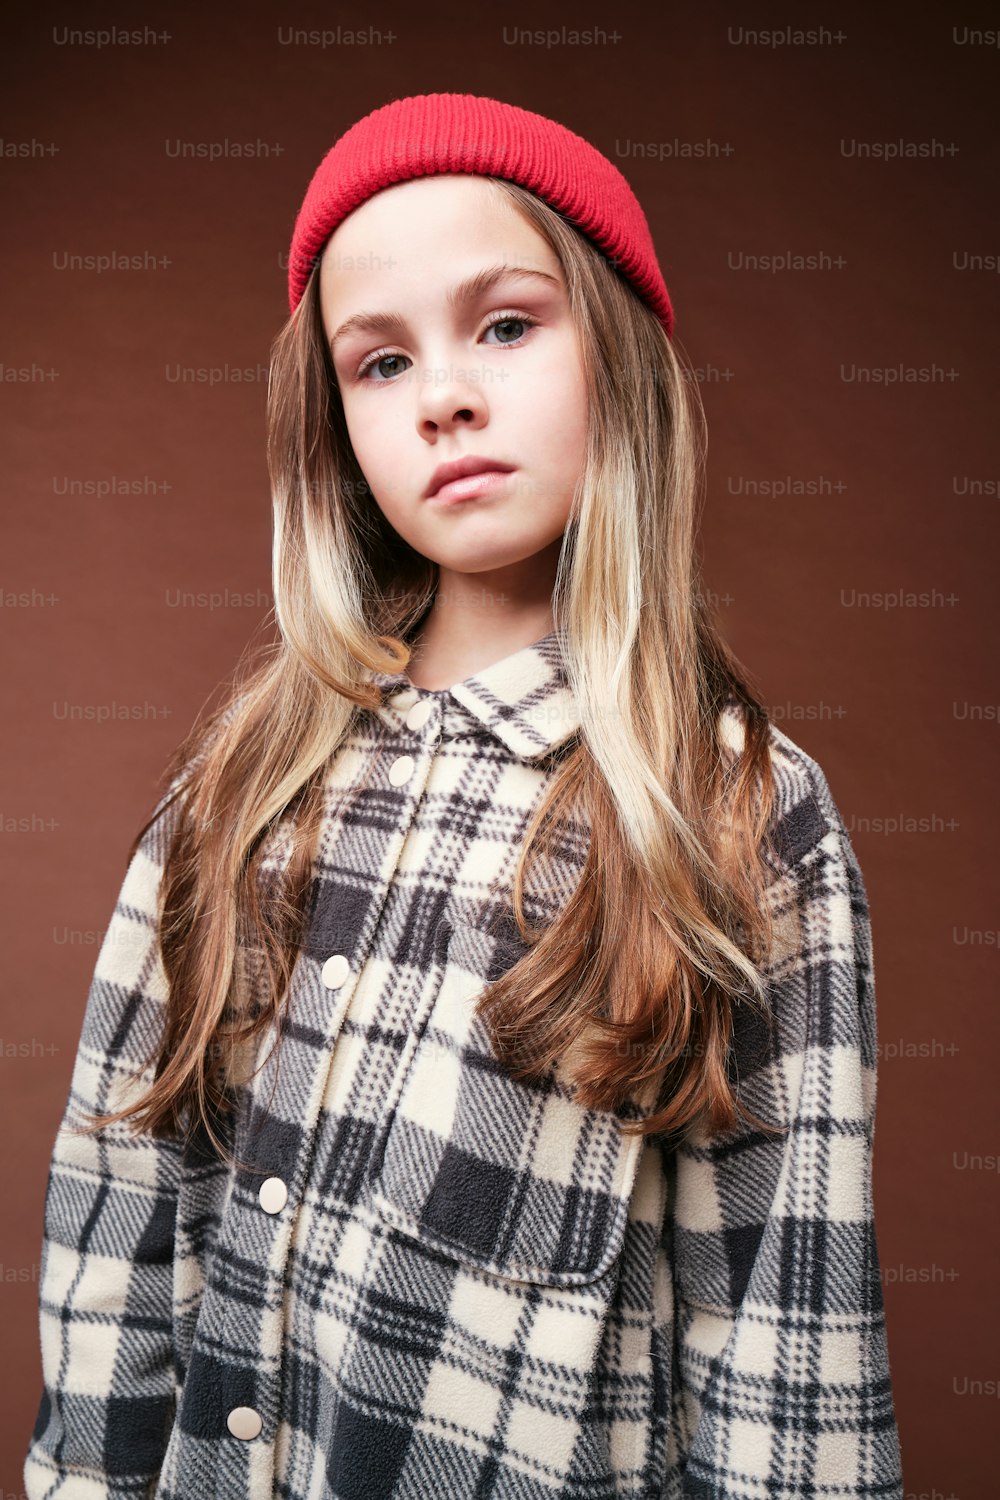 a young girl wearing a plaid coat and a red beanie